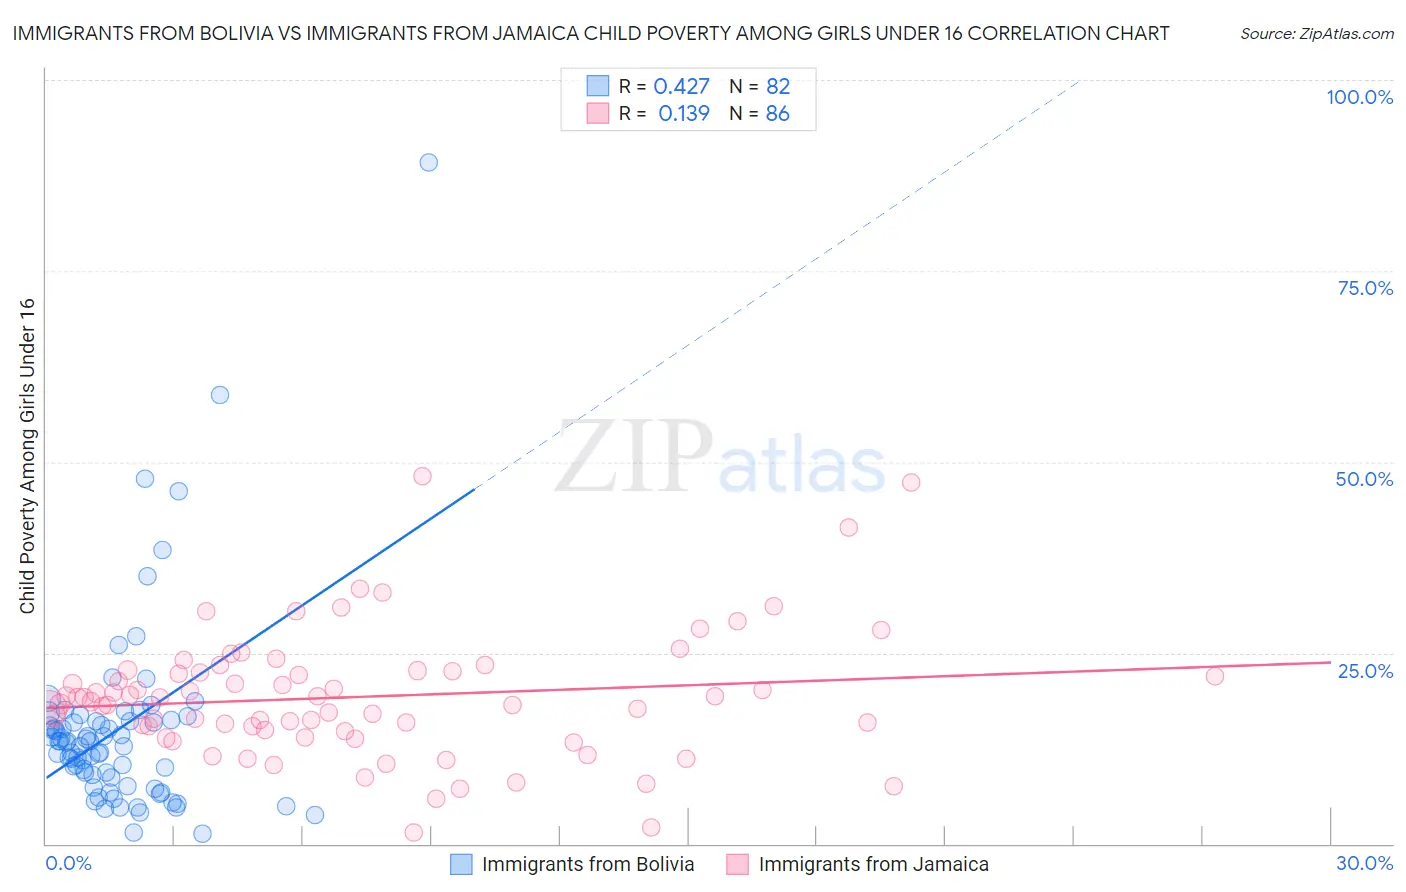 Immigrants from Bolivia vs Immigrants from Jamaica Child Poverty Among Girls Under 16